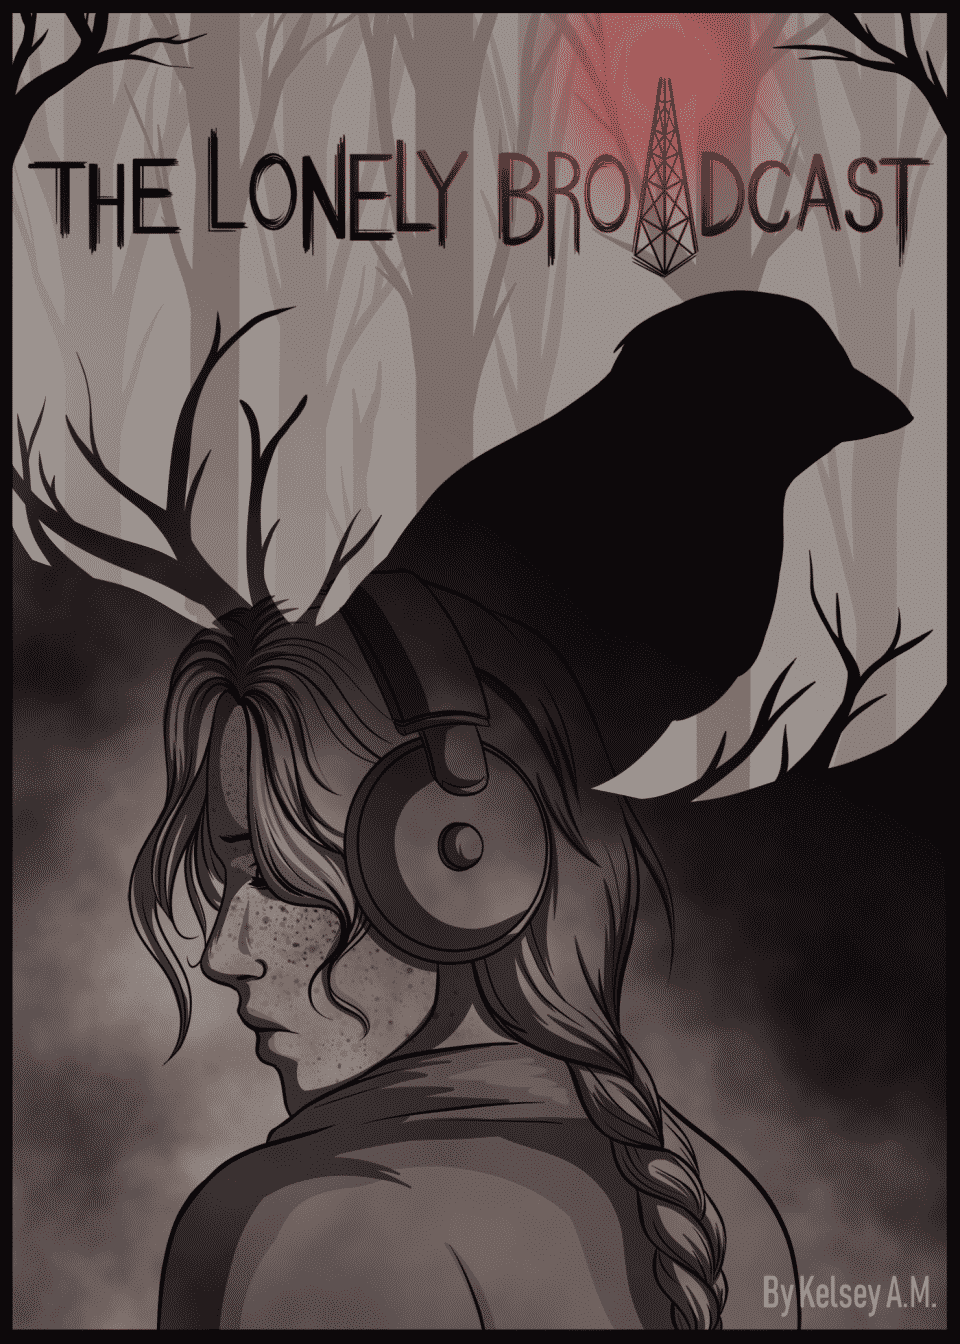 The Lonely Broadcast